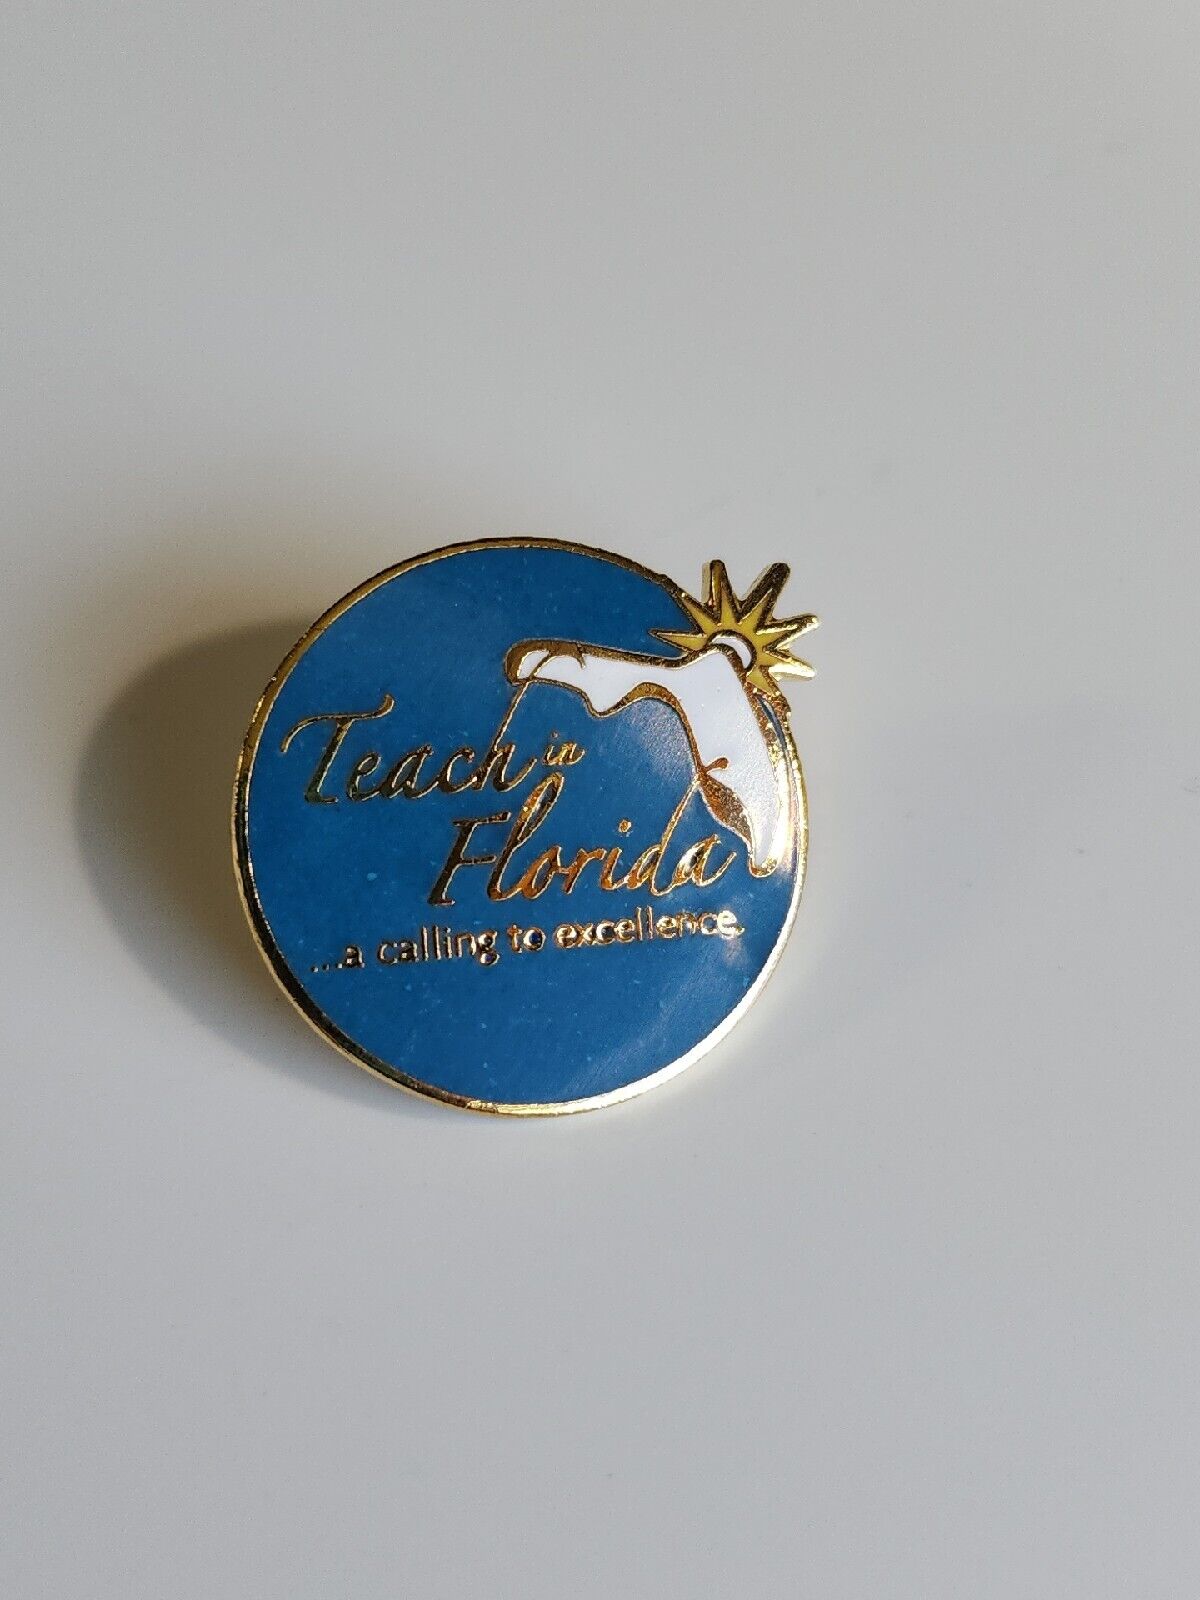 Teach In Florida  A Calling To Excellence Lapel Pin